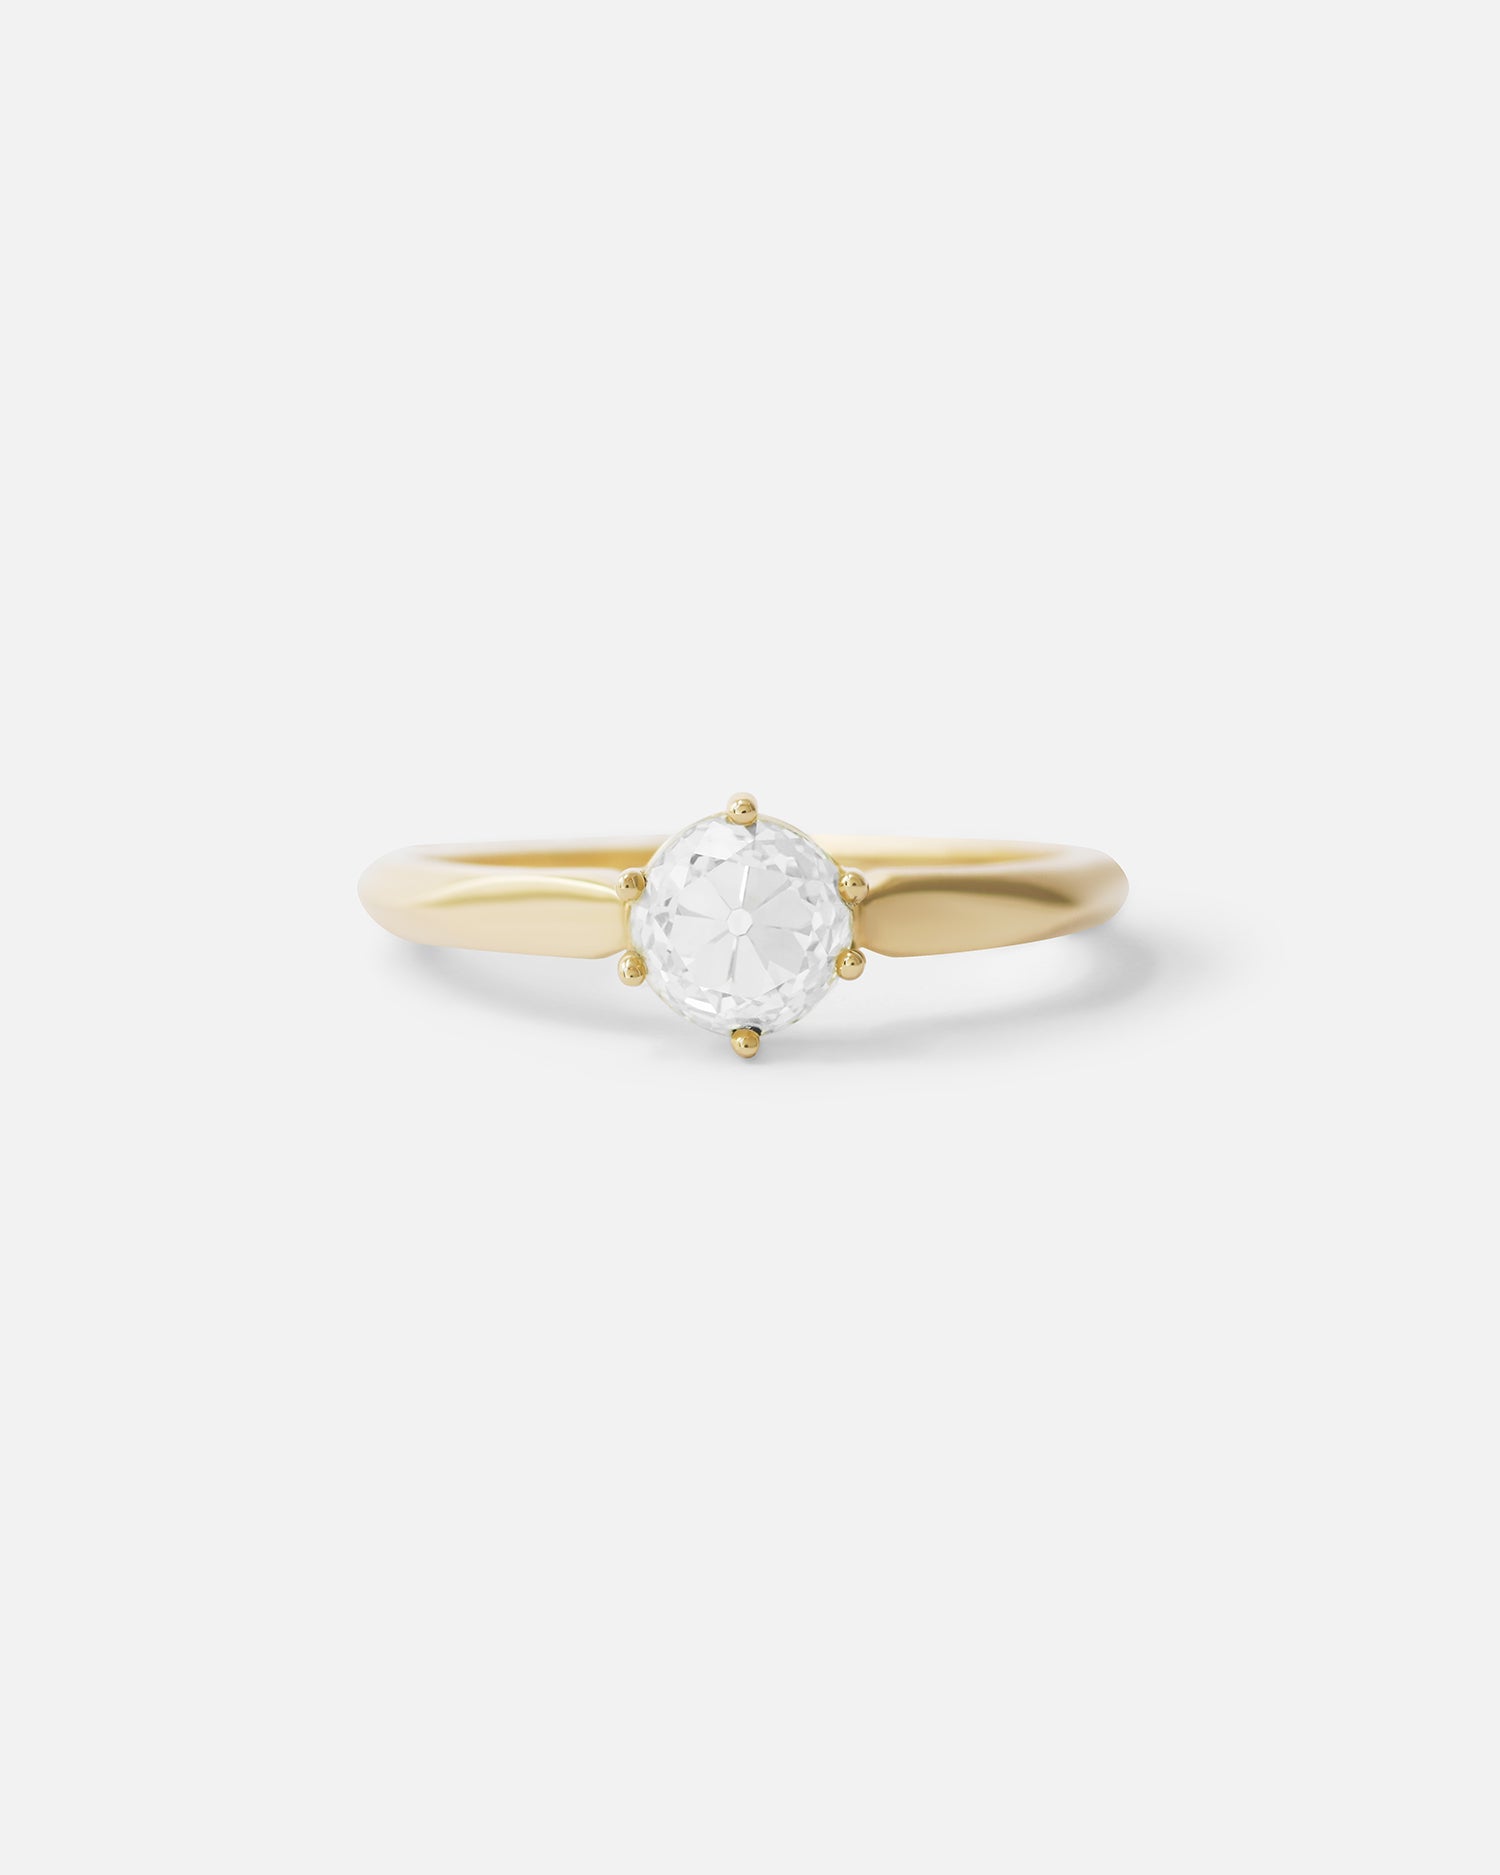 Leigh / Old Euro Diamond Ring By Casual Seance